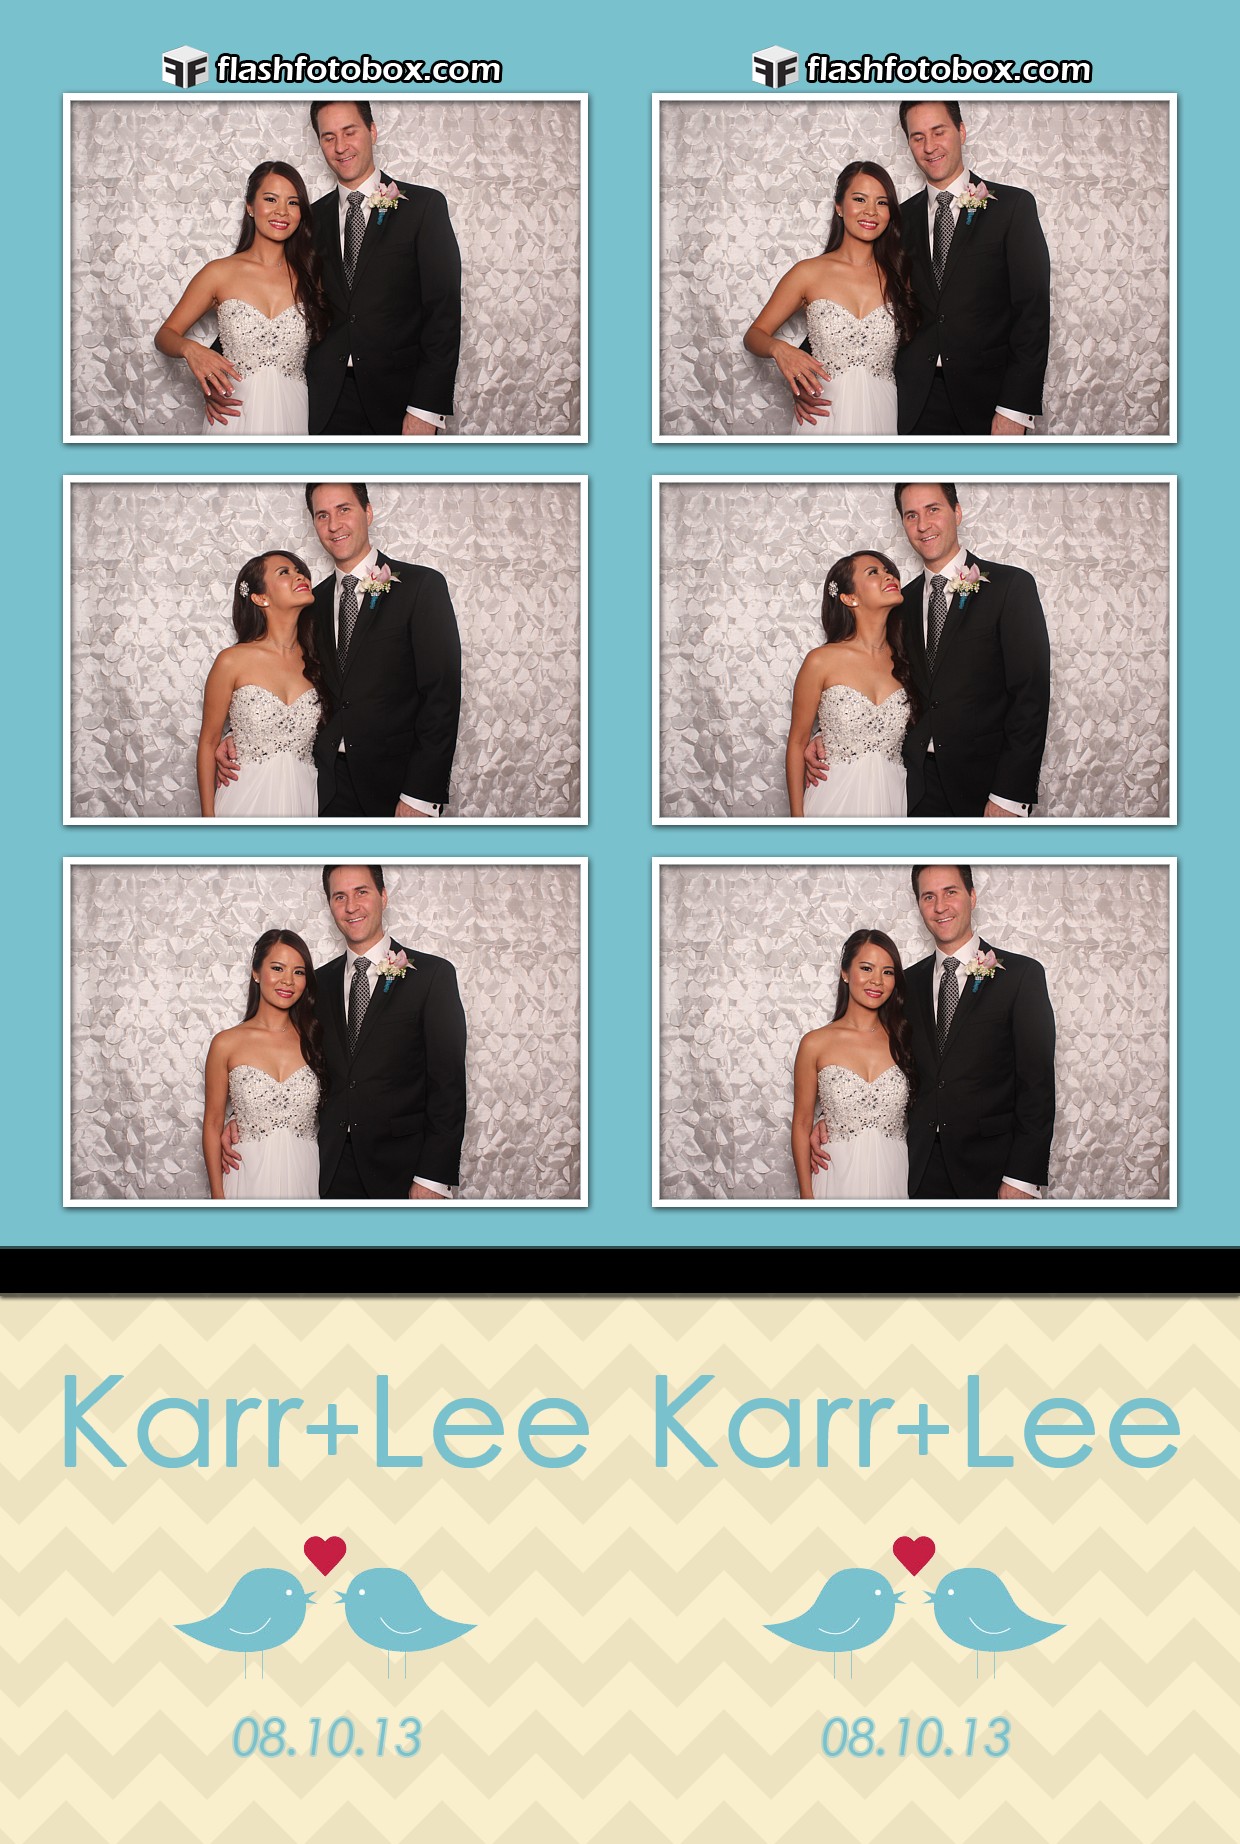 Lee & Karr Wedding – Thanh Thanh – August 10, 2013